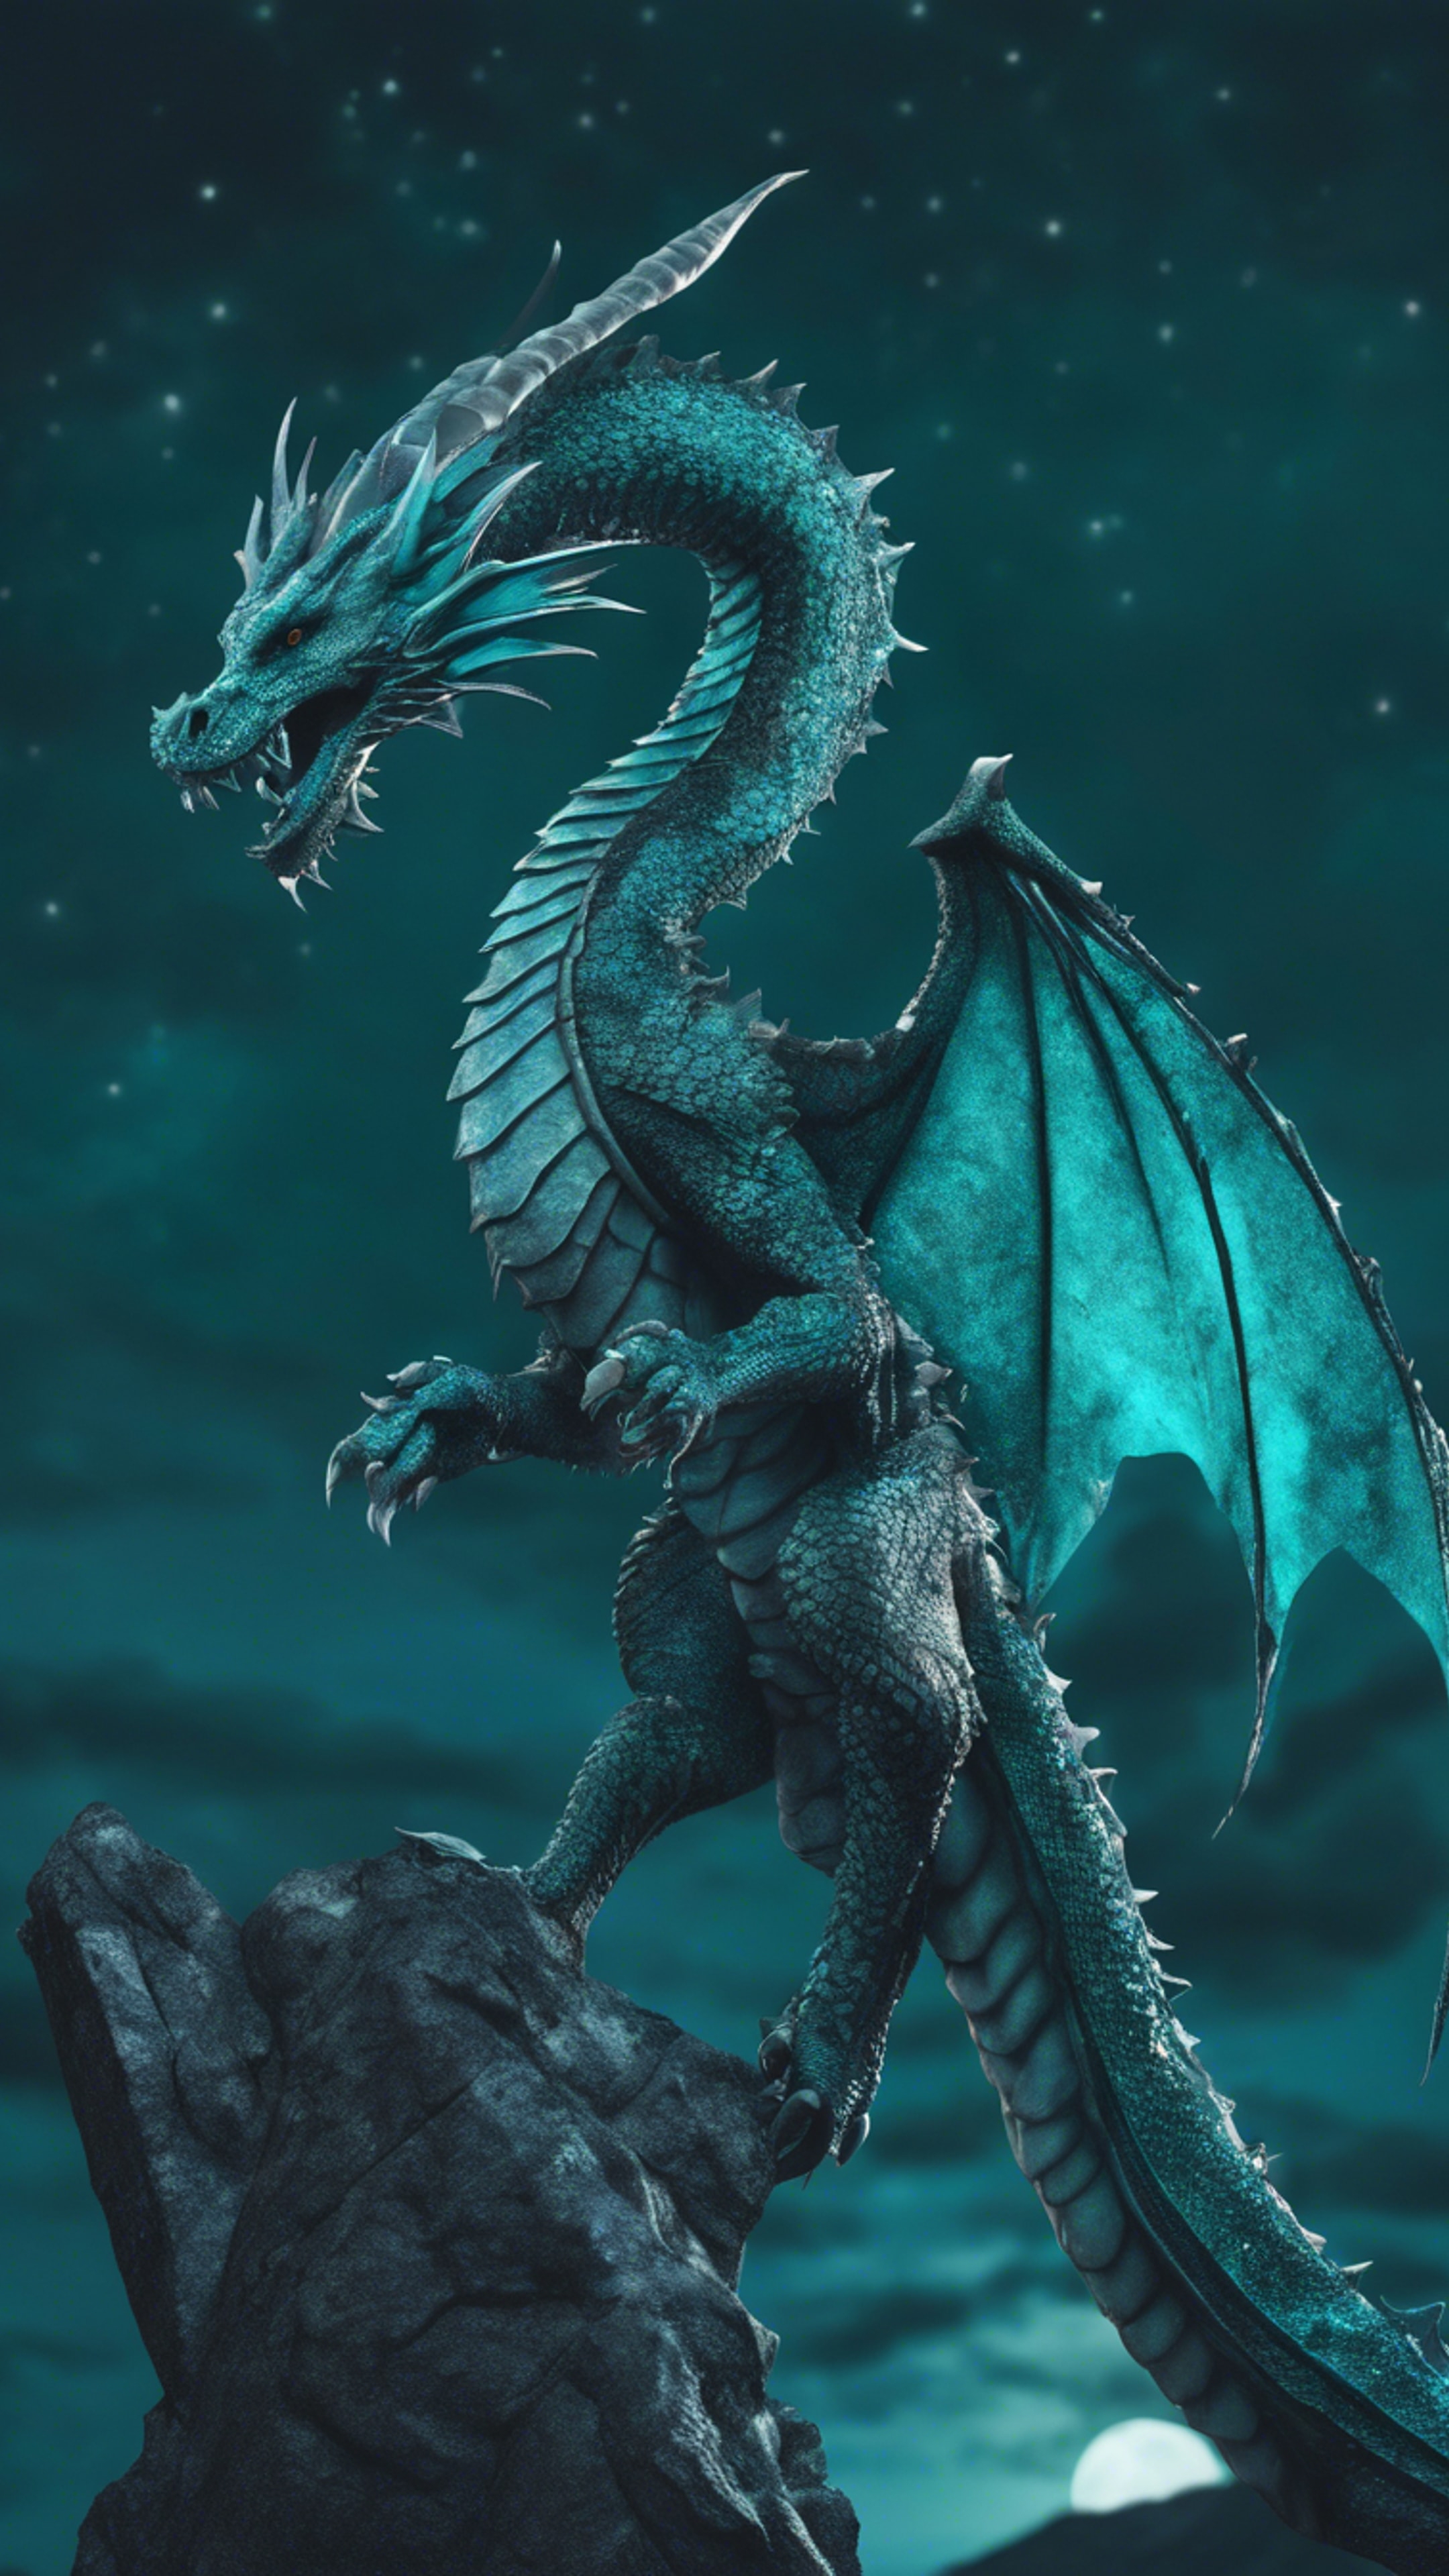 A serpentine Gothic dragon perched on a tall mountain, its teal scales shimmering under the moonlight. ورق الجدران[91ef634c137e4b1f8ab5]